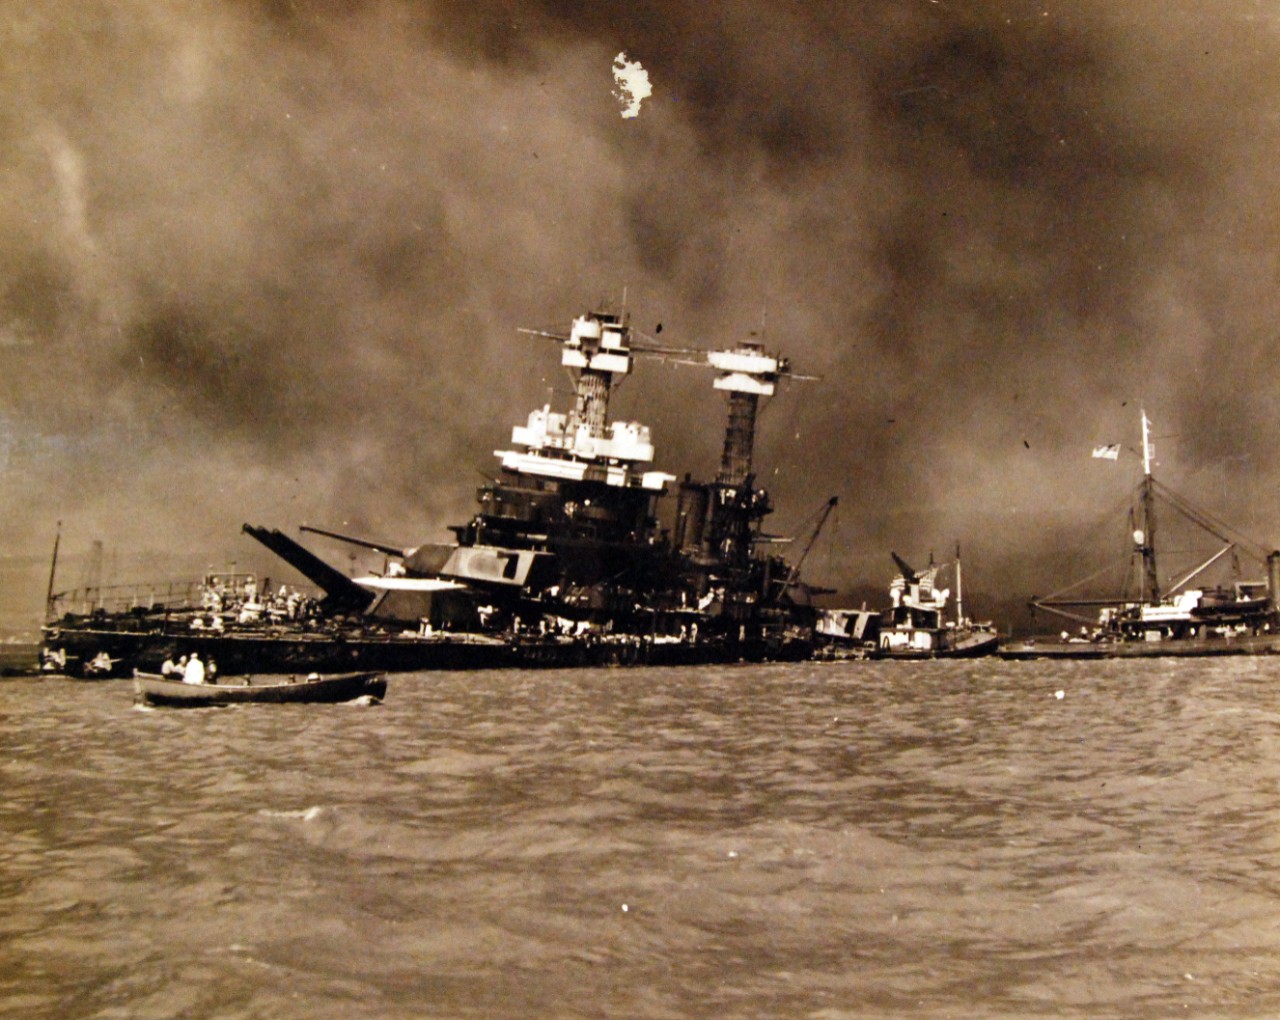 80-G-32740:   Japanese Attack on Pearl Harbor, December 7, 1941.   USS California (BB 44) after the attack.  Official U.S. Navy photograph, now in the collections of the National Archives. (9/9/2015).